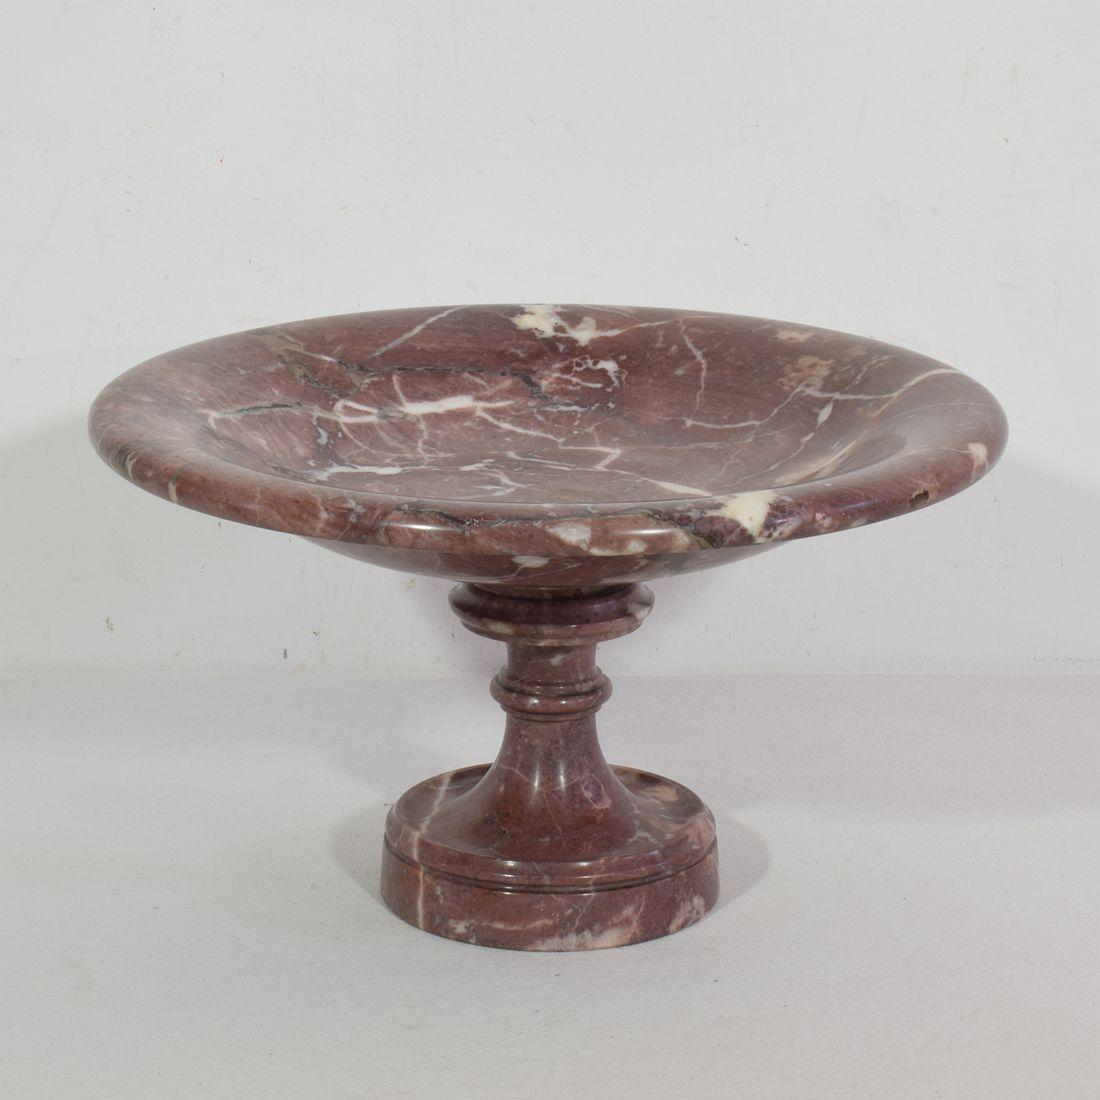 Original and very rare marble tazza. Beautiful color.
Italy, circa 1800-1850
Good condition but consistent with its high age a bit weathered.
More pictures available on request.